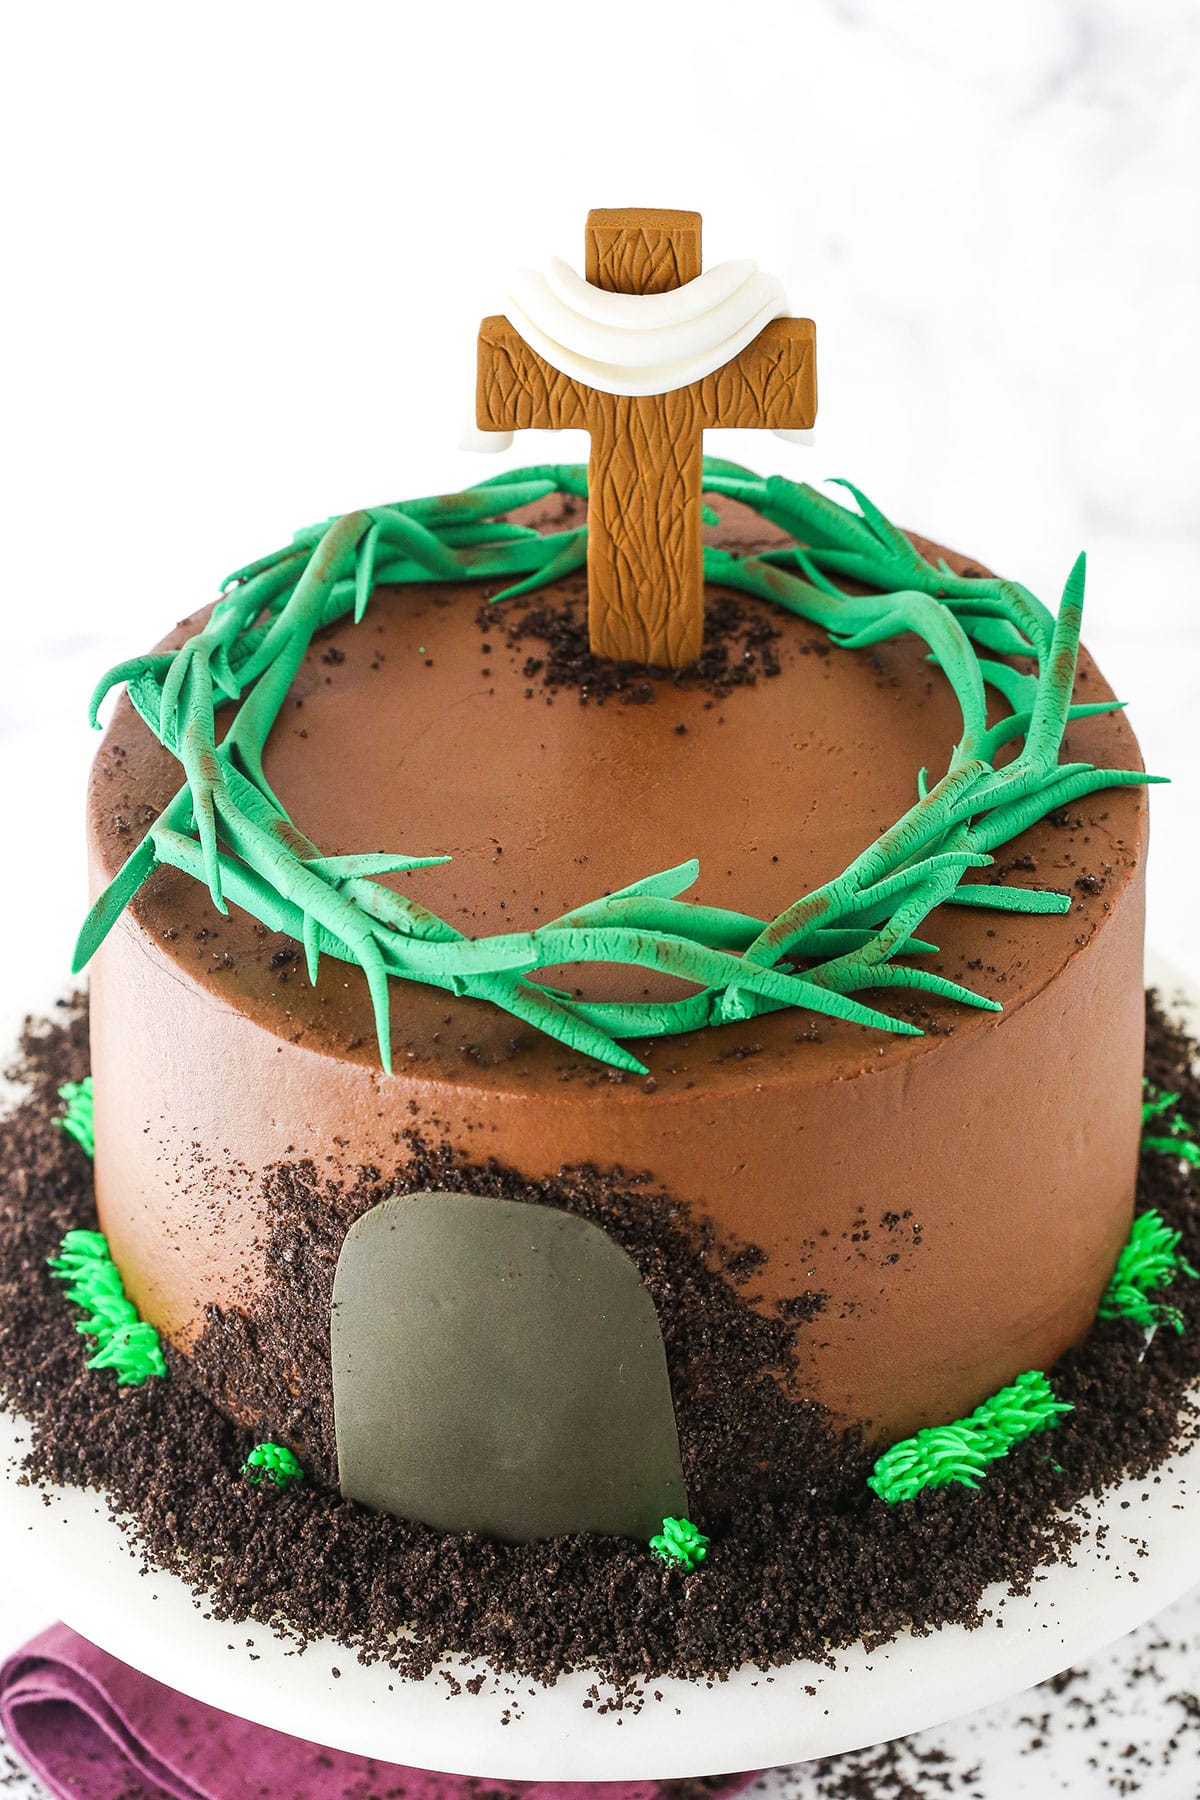 Side view of a Resurrection Cake decorated with a fondant cross and crown of thorns